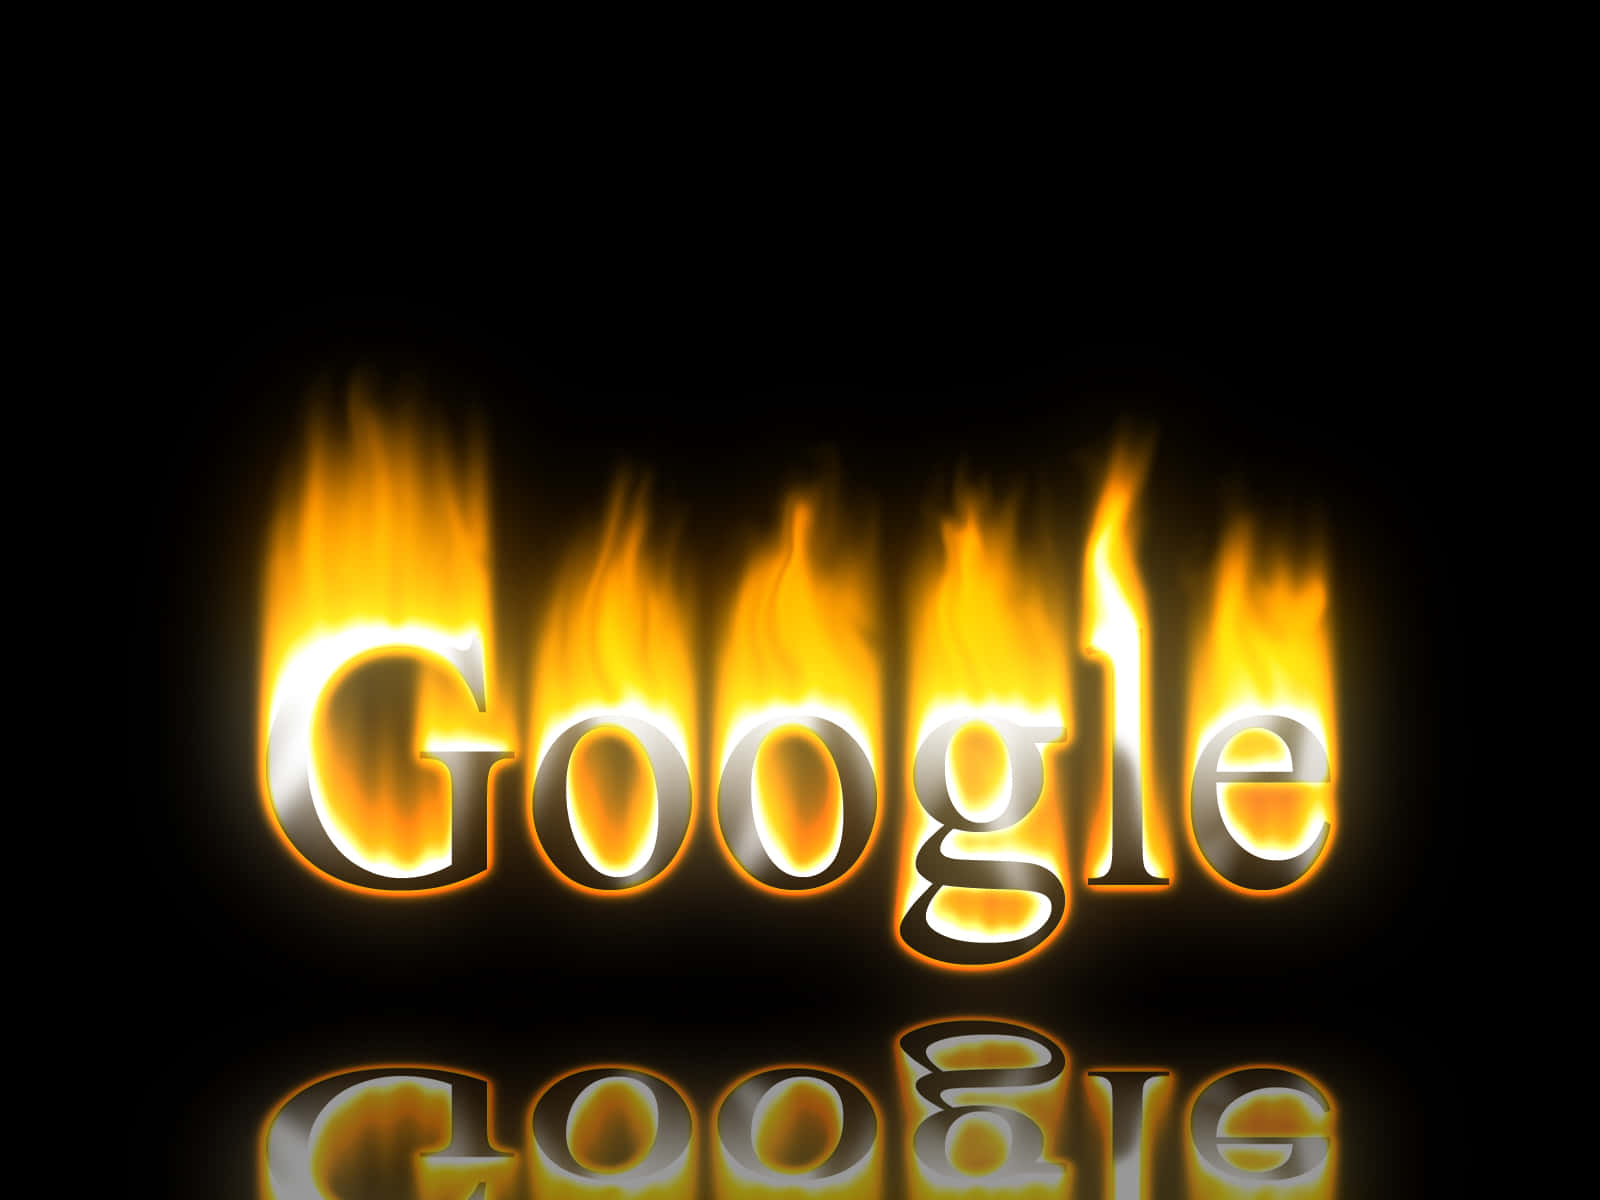 Download Get the Best from Google Wallpaper | Wallpapers.com